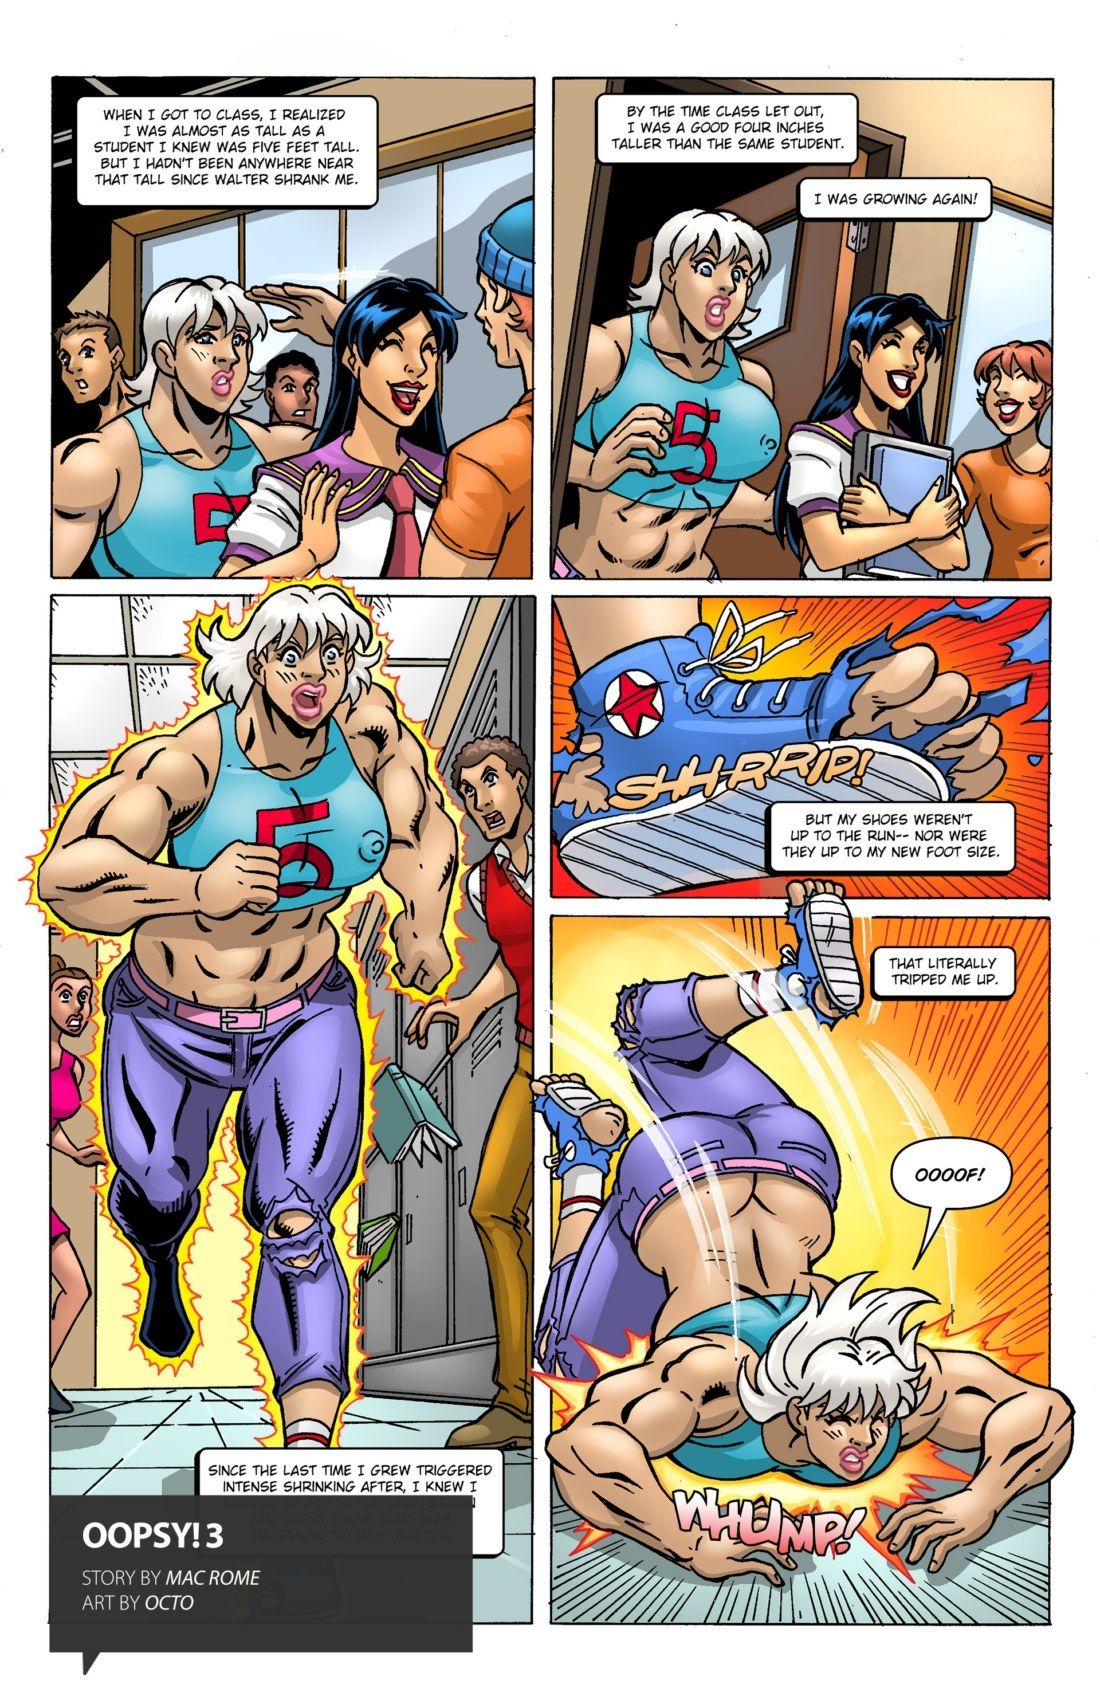 Steampumped Issue 2 by Amblagar (MuscleFan) page 19